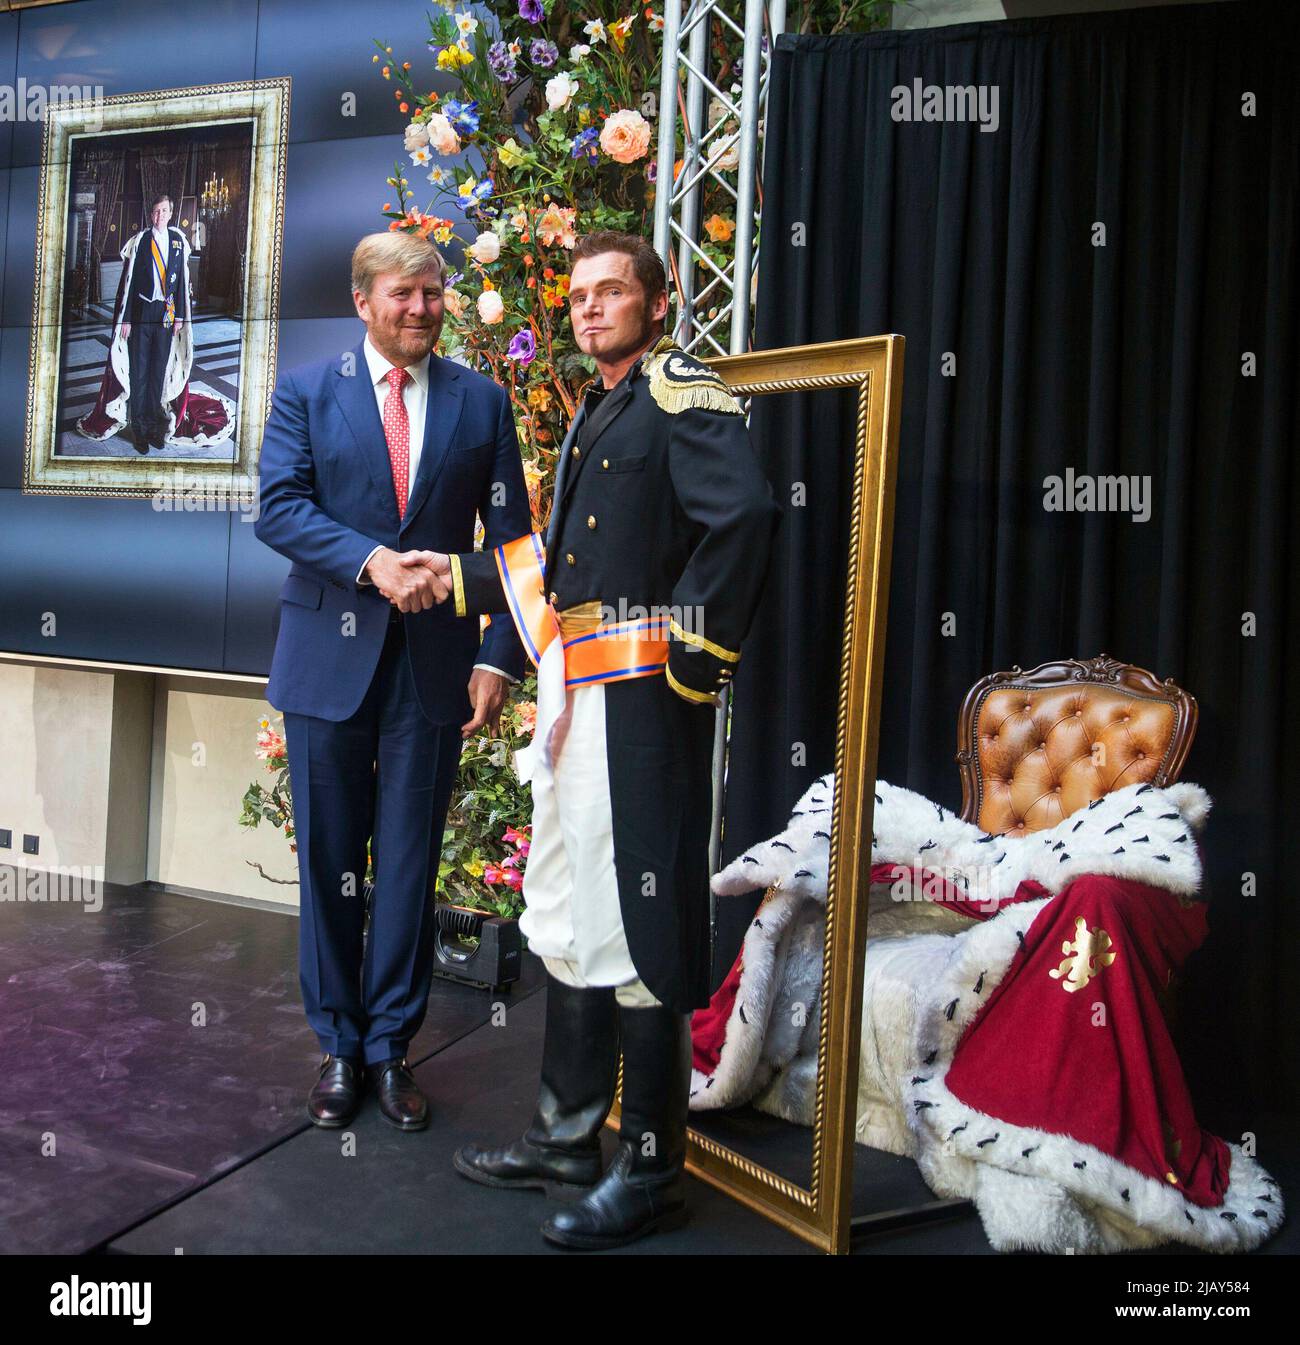 King Willem-Alexander of The Netherlands at the Mauritshuis in The Hague, on June 01, 2022, to open the exhibition FLASH | BACK, which will celebrate its 200th anniversary in 2022. In the exhibition, sixteen photographers, both established names and up-and-coming talent, translate the work of 17th century masters into sixteen new works of art Albert Nieboer/Netherlands OUT/Point de Vue OUT Stock Photo